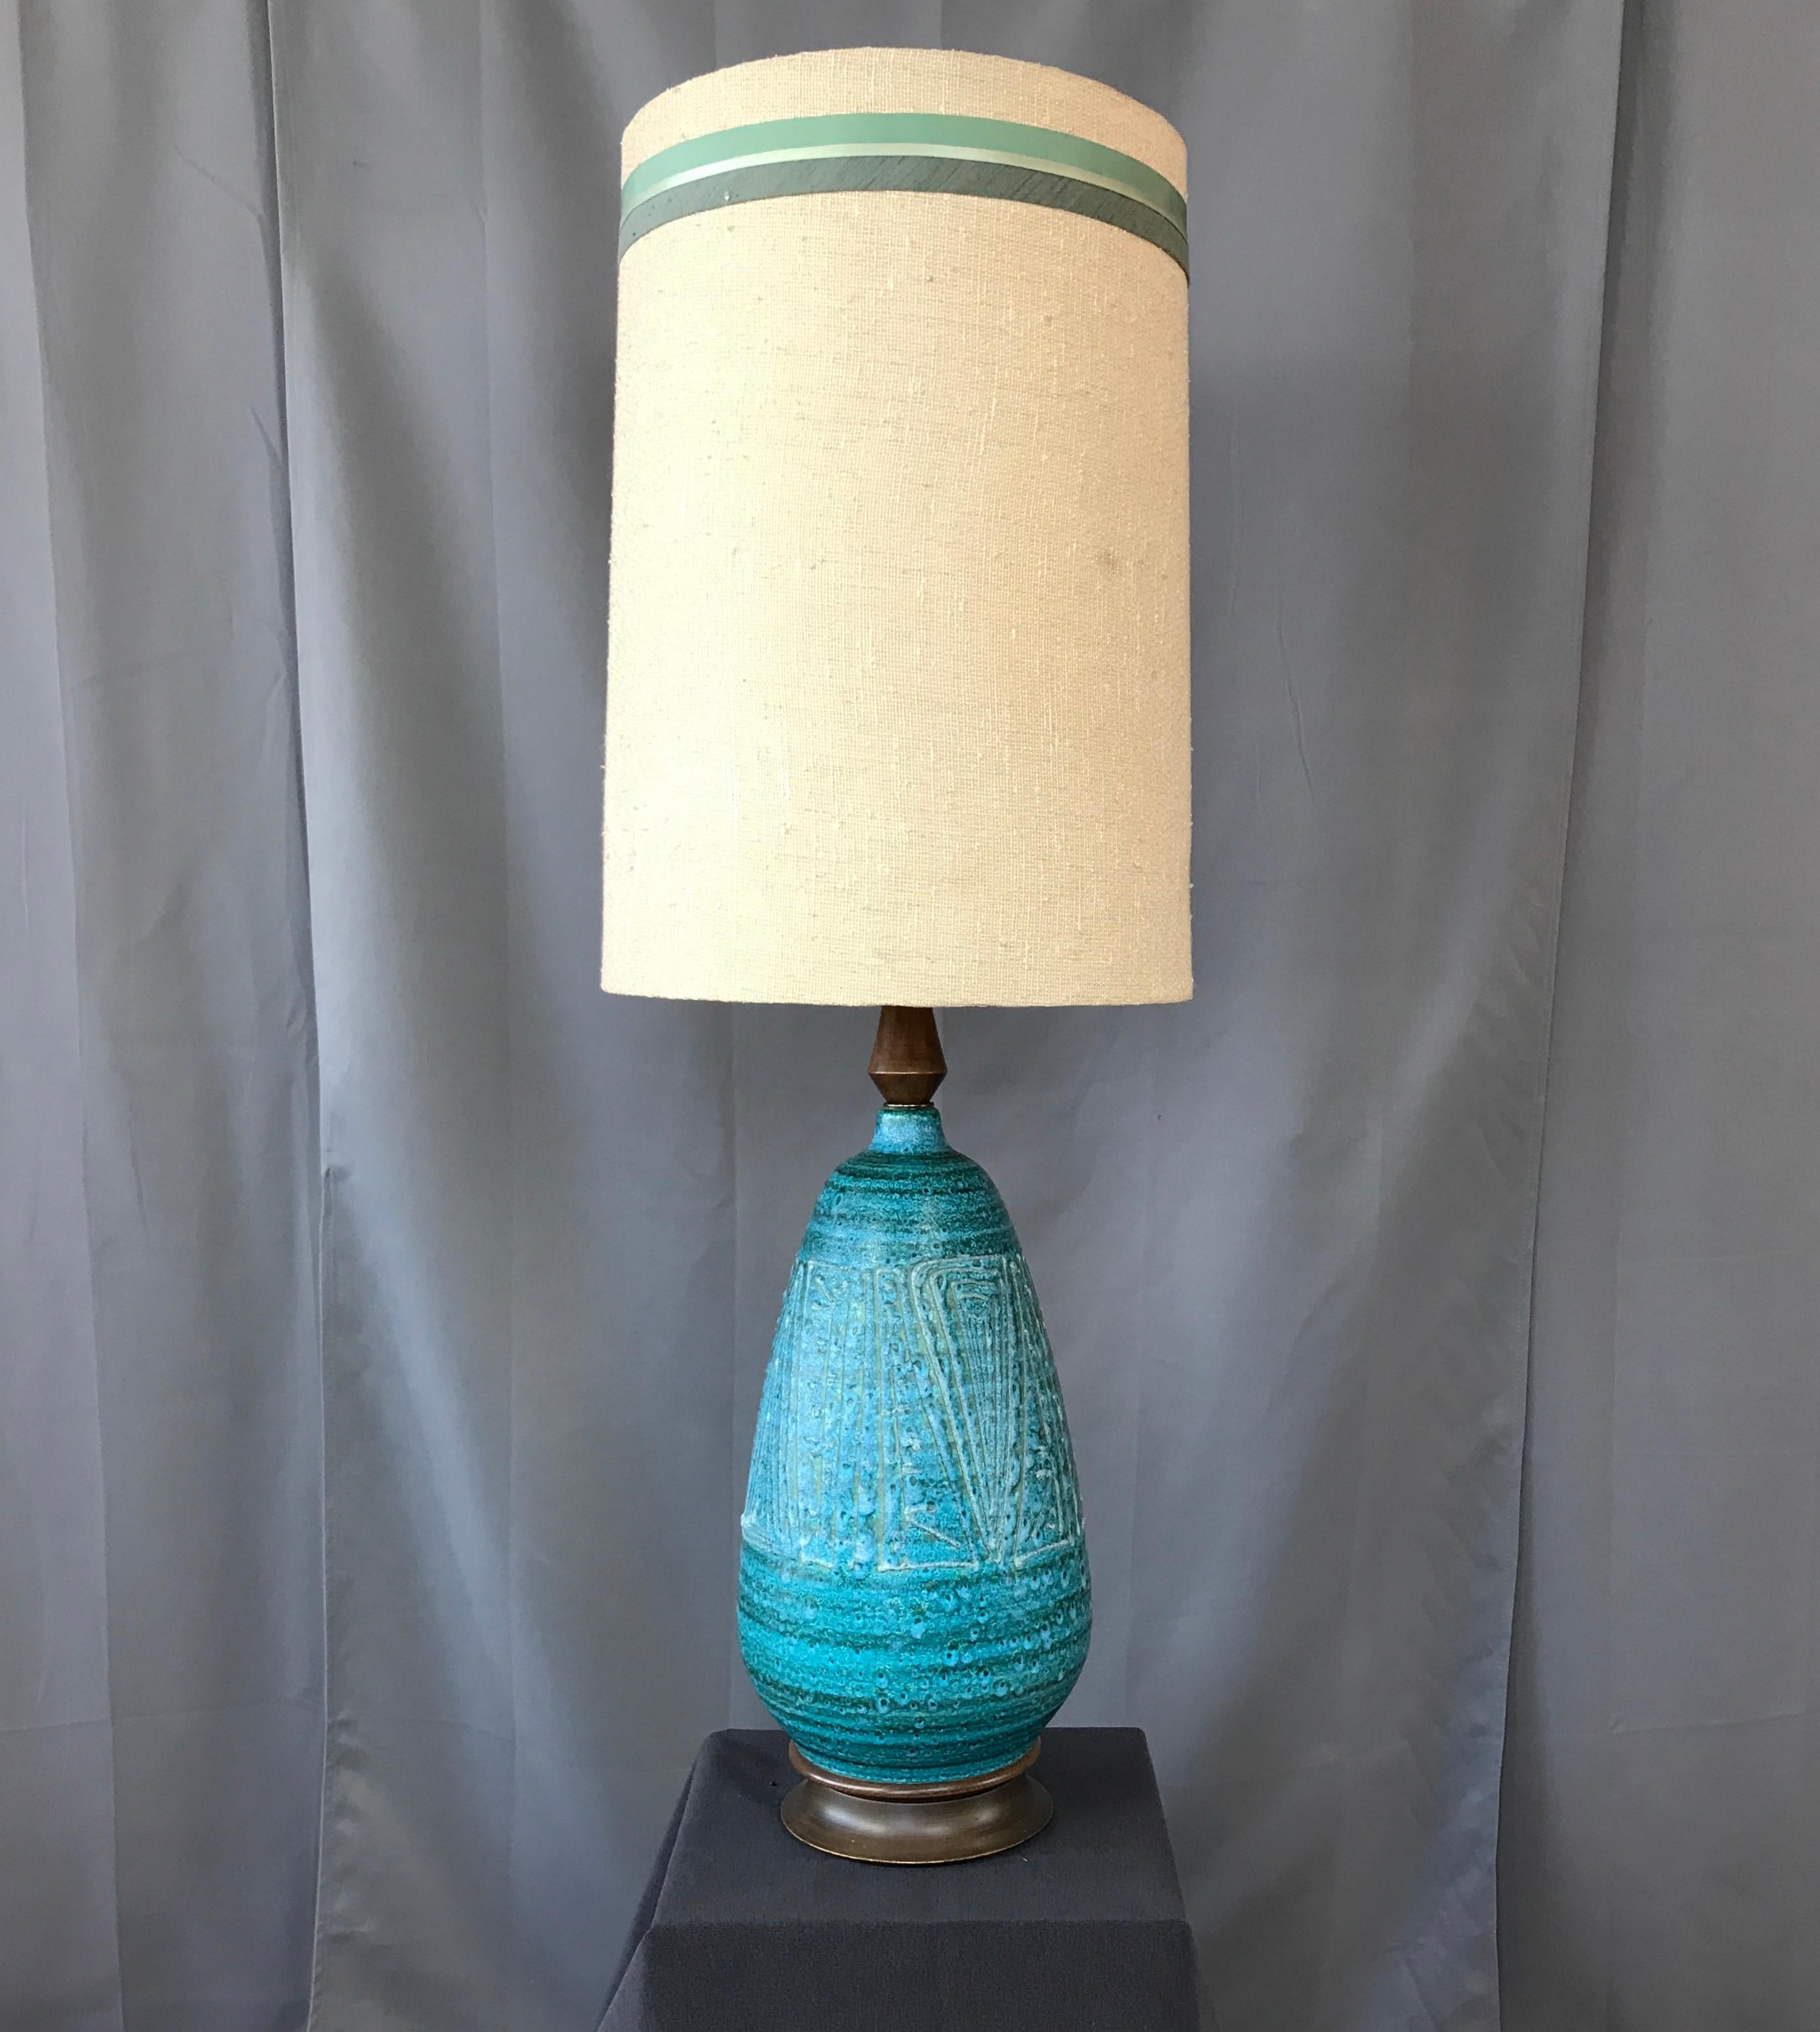 Offer here is a monumental circa 1950s ceramic lamp. The lamp's large body is mostly blue with hints of green, framed by a large walnut stain wood base and neck. A freeform and textured design on the ceramic. No markings, but sure has that Italian